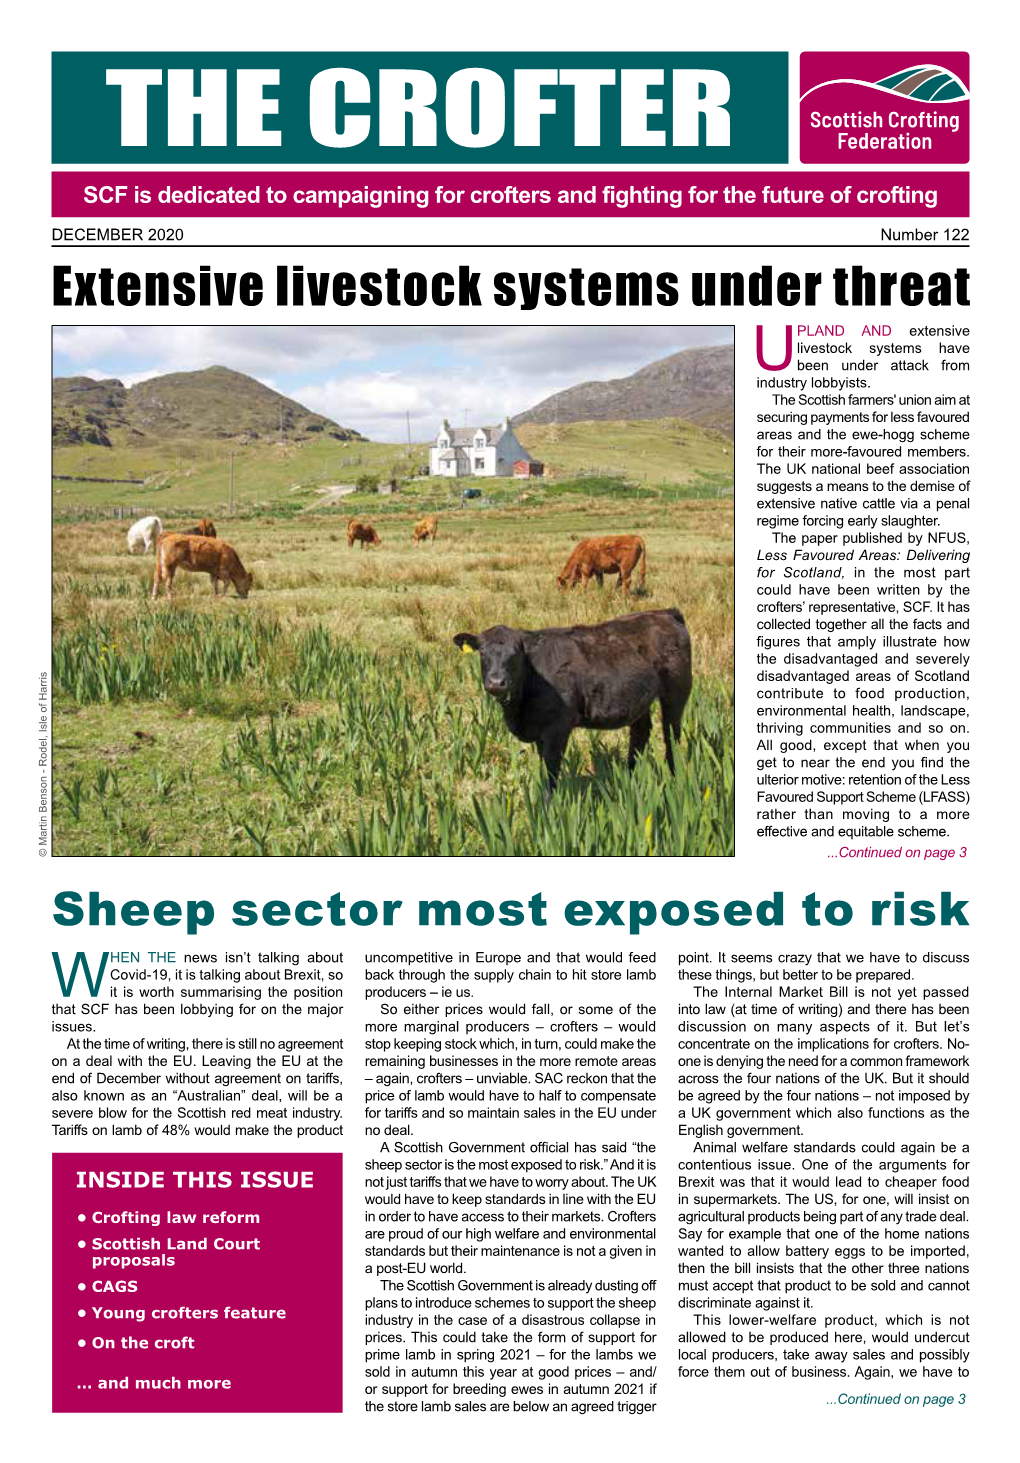 DECEMBER 2020 Number 122 Extensive Livestock Systems Under Threat PLAND and Extensive Livestock Systems Have Ubeen Under Attack from Industry Lobbyists